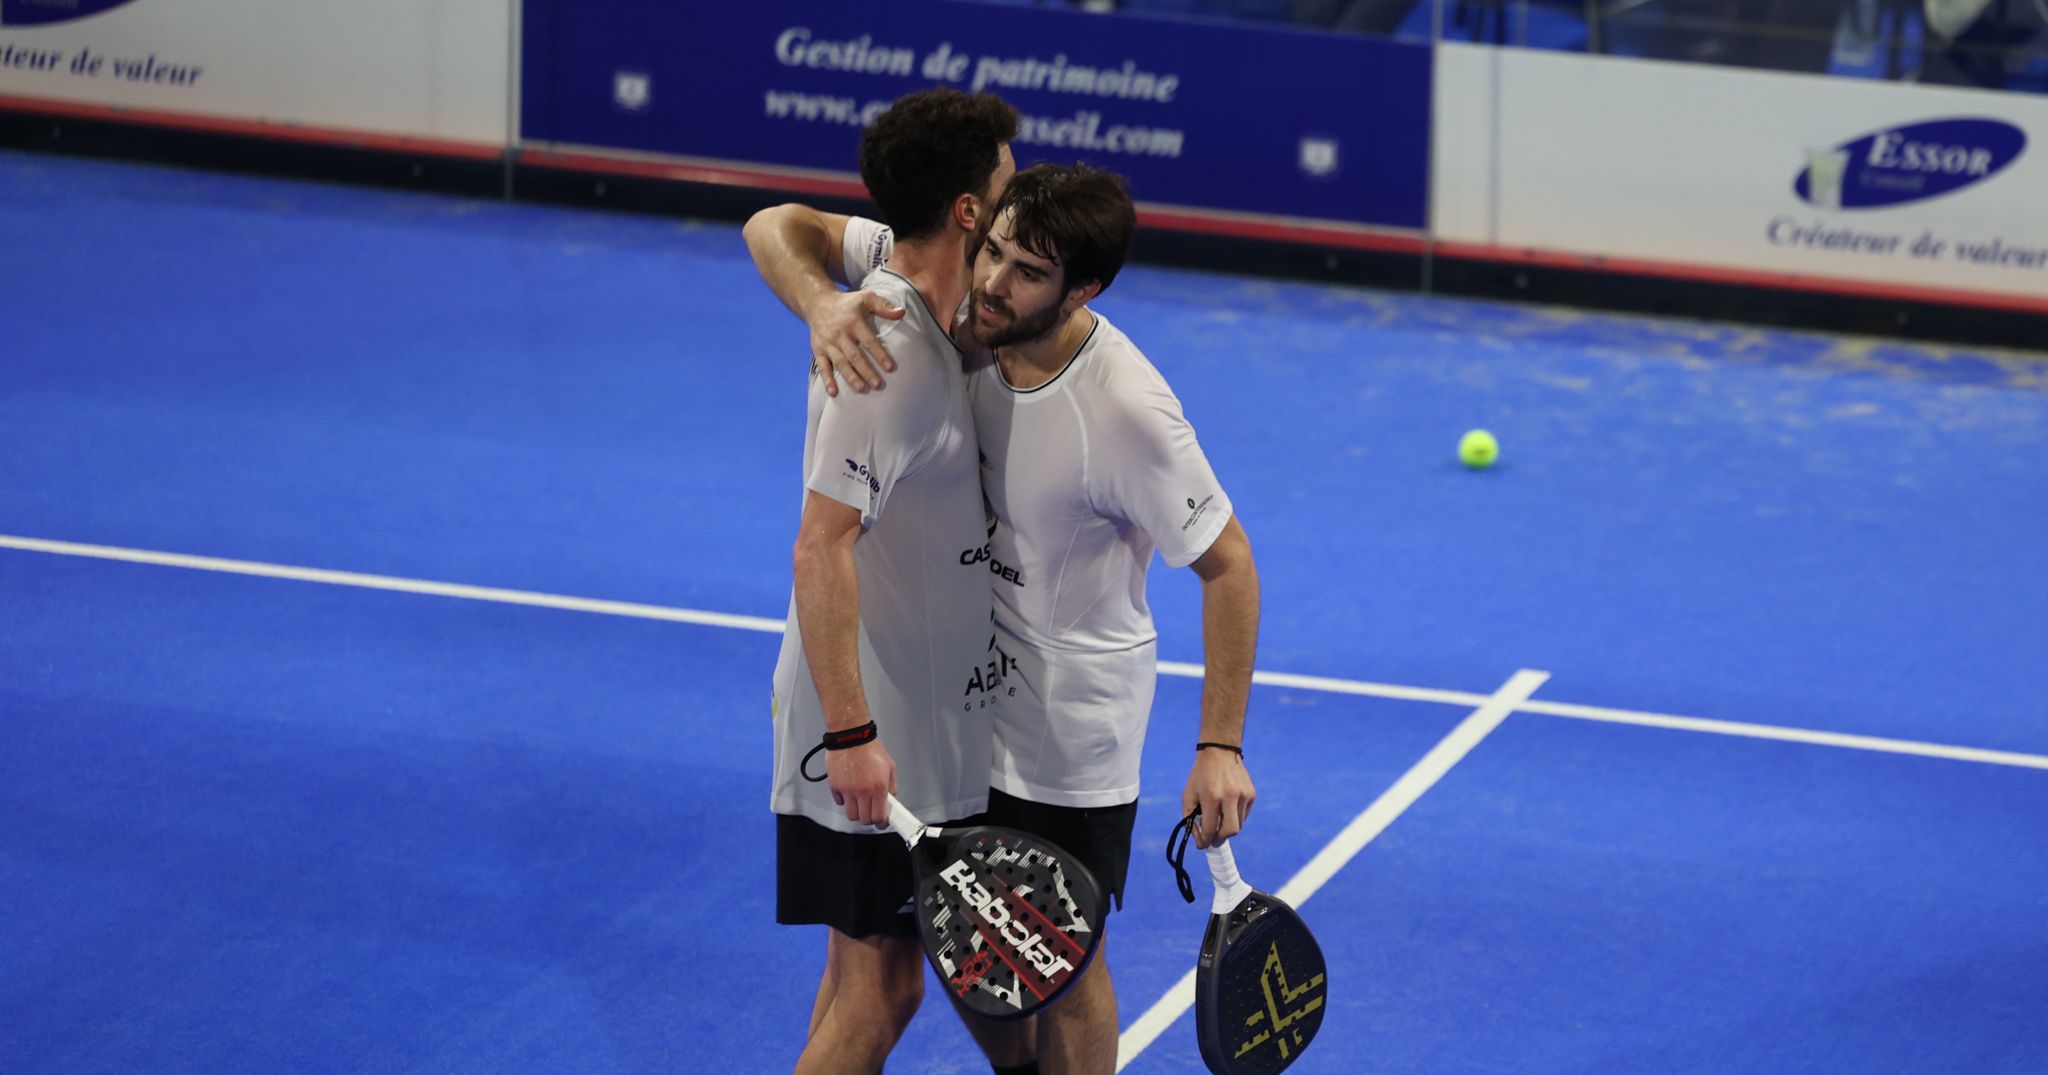 Home Padel escapes the Palavas trap and heads straight for the interclub final